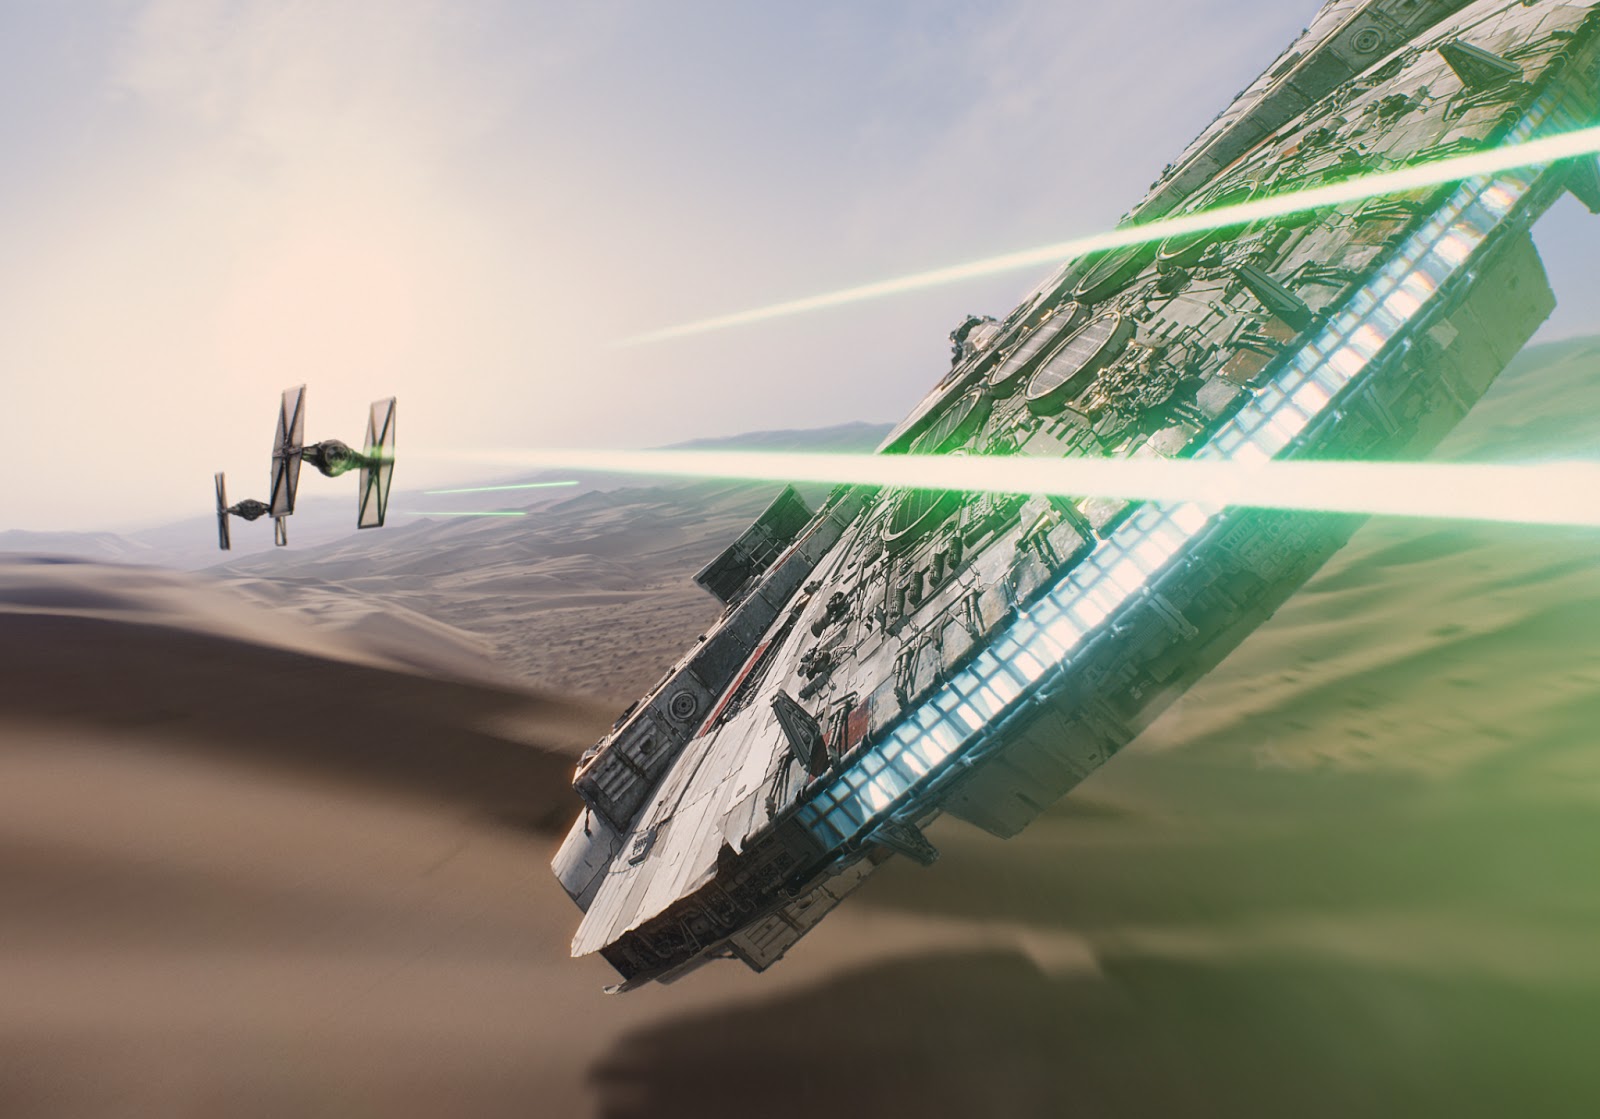 The Millenieum Falcon, flying over a desert, takes on two TIE Fighters.